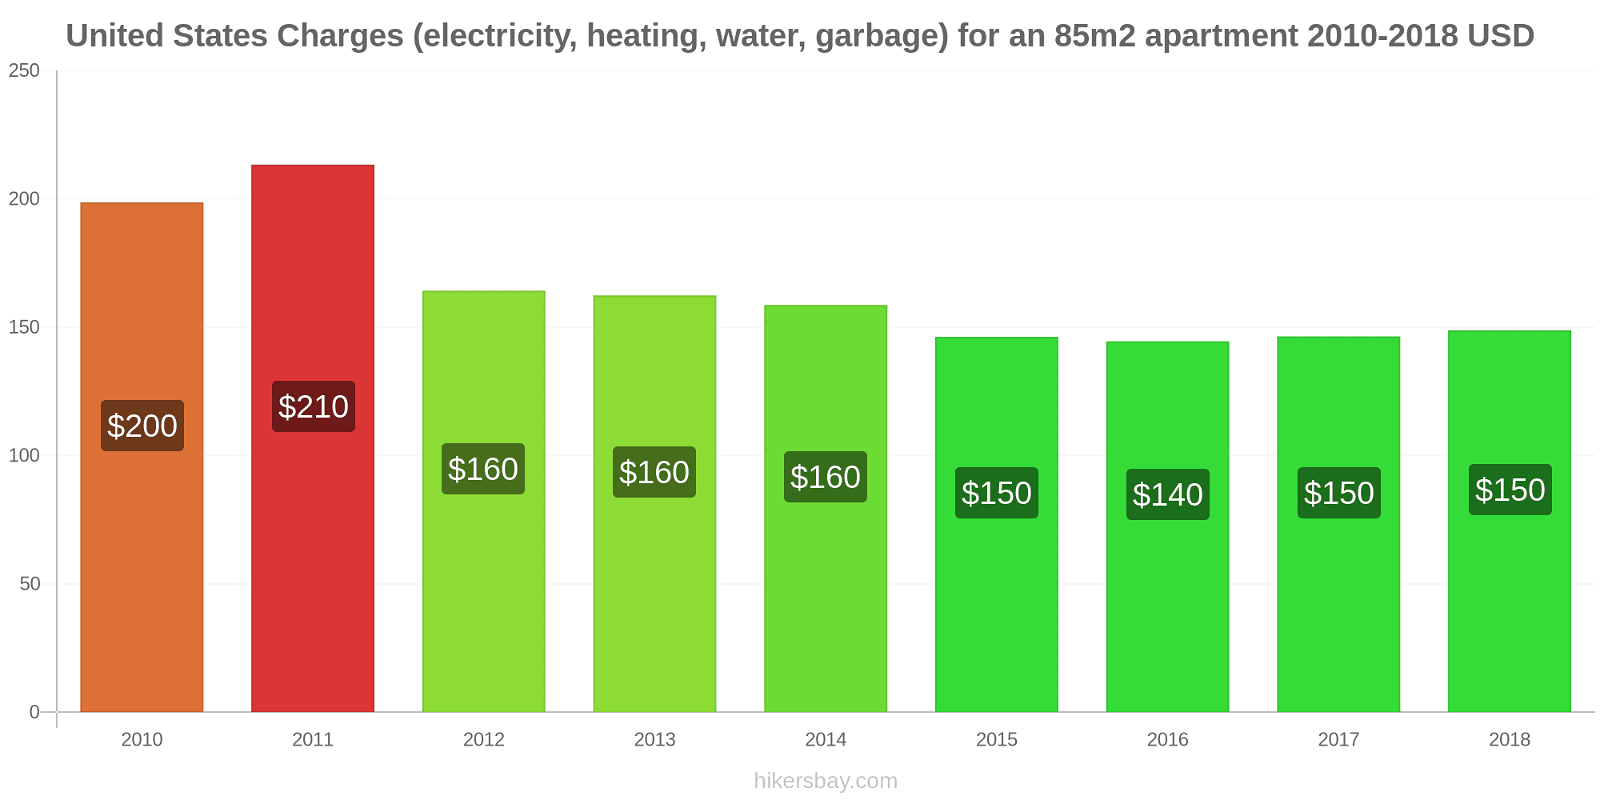 United States price changes Utilities (electricity, heating, water, garbage) for an 85m2 apartment hikersbay.com